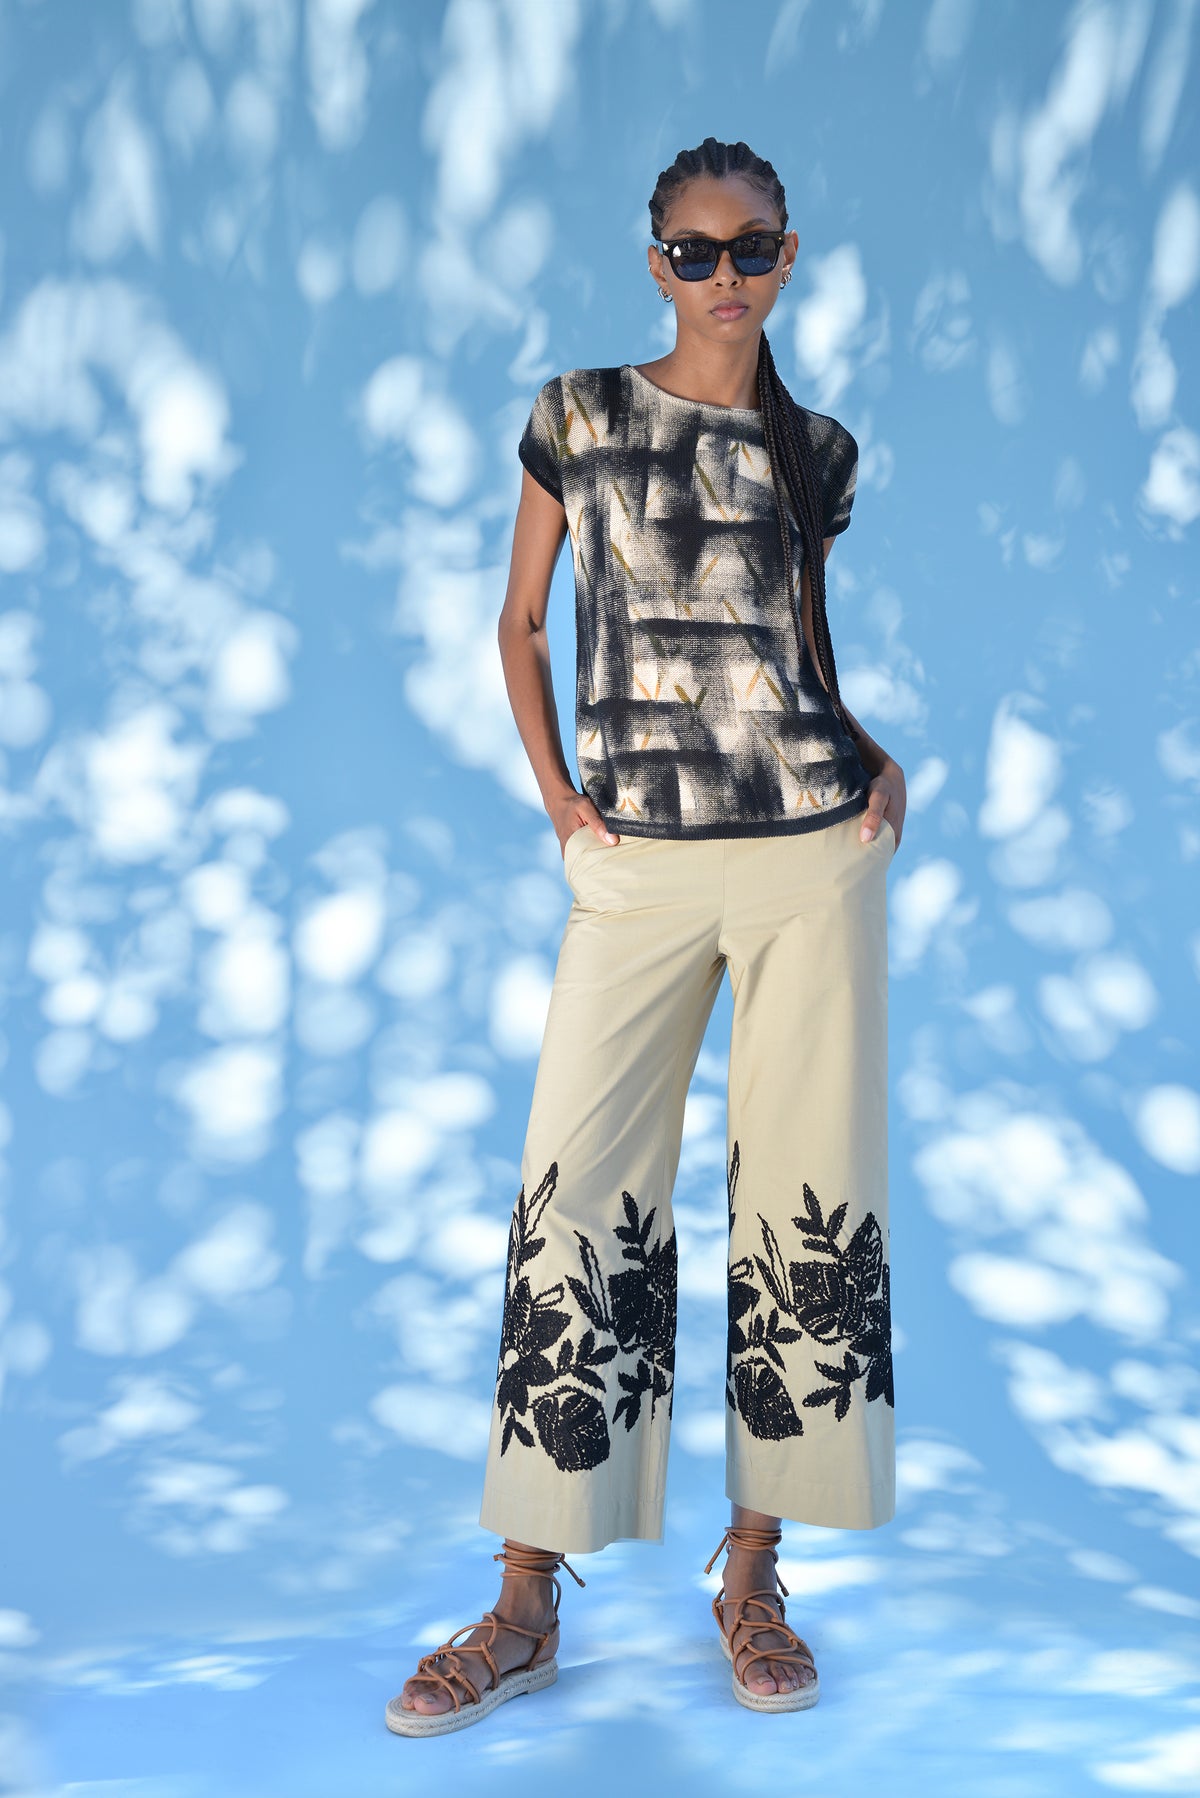 hand-painted sweater 4340.908.002
embroidered trousers 6725.313.136